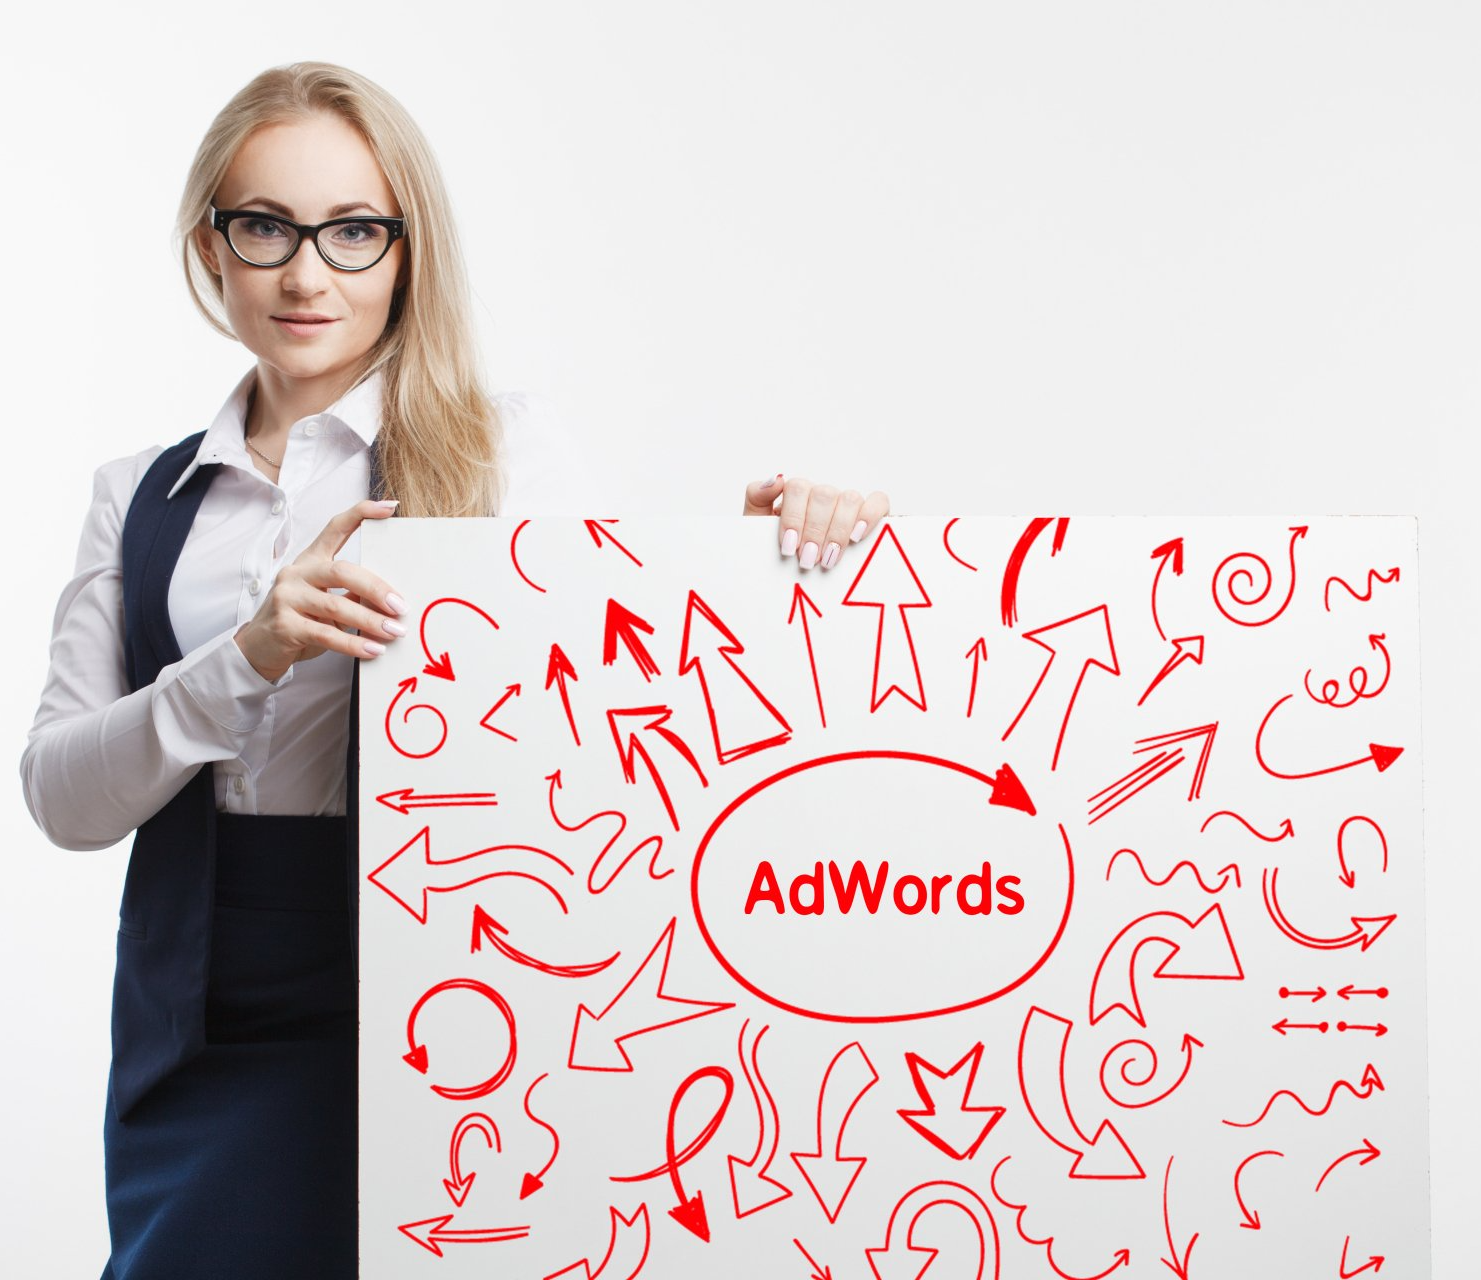 A woman is holding a sign that says adwords on it